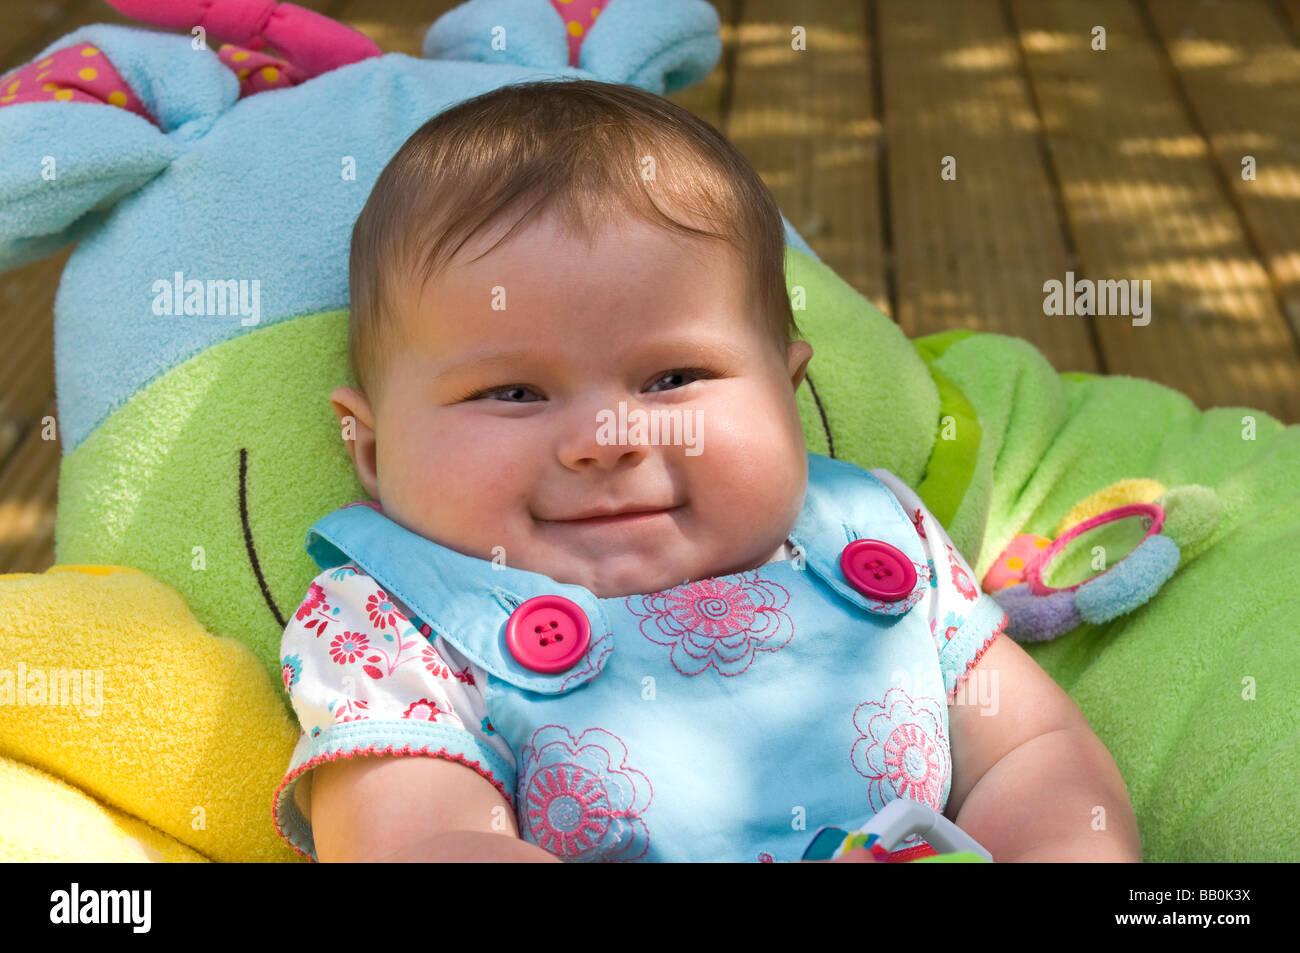 Horizontal close up portrait of a six month old baby girl shrugging her shoulders laughing in the garden on a sunny day Stock Photo